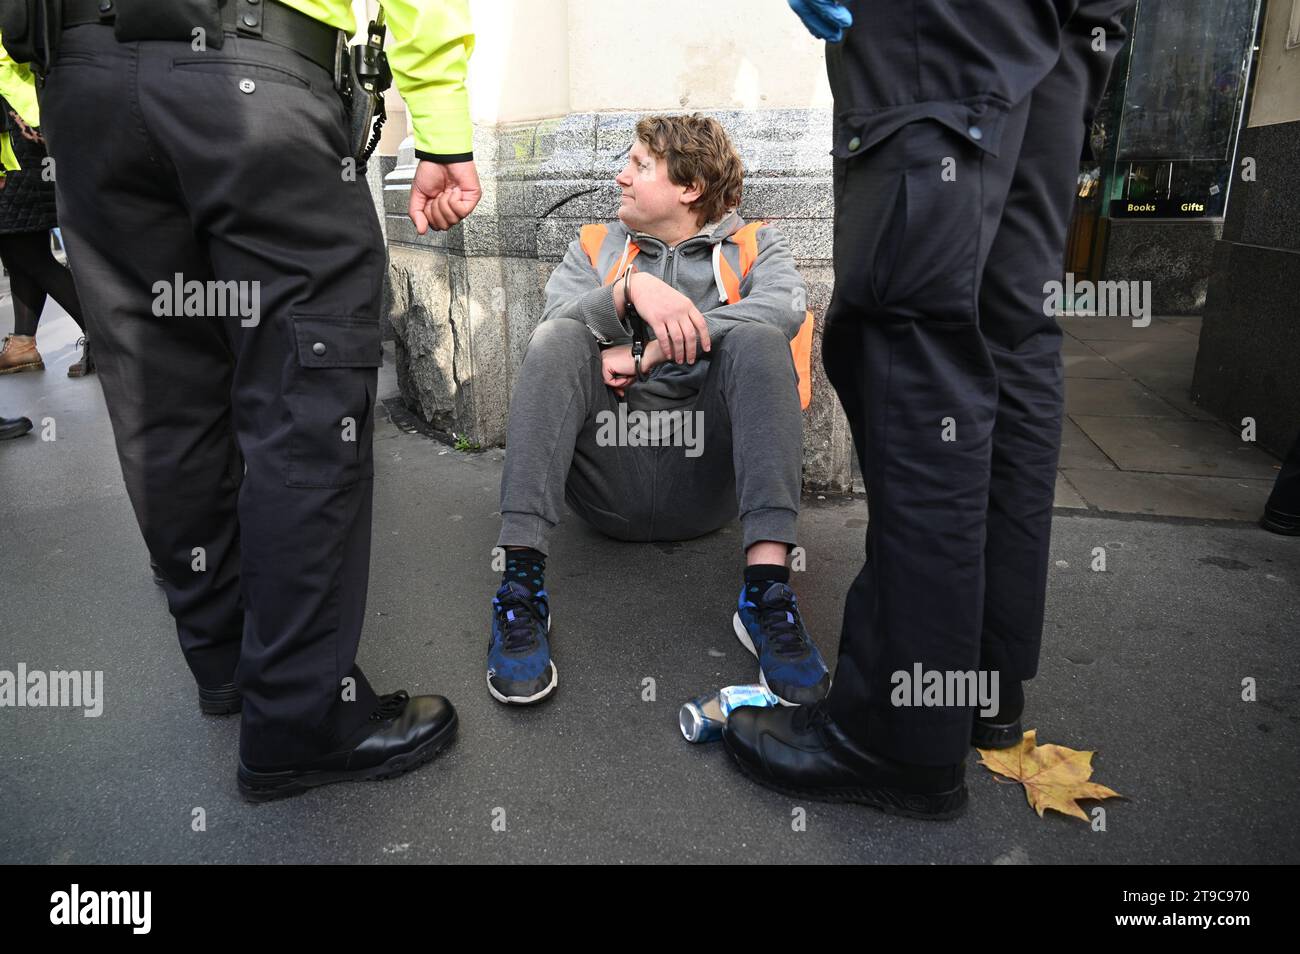 London, UK. Four people with Just Stop Oil banners were arrested in Whitehall when they moved from the pavement onto the road. Actors and academics have criticised the UK governments climate 'madness' and limits on protest. Credit: michael melia/Alamy Live News Stock Photo